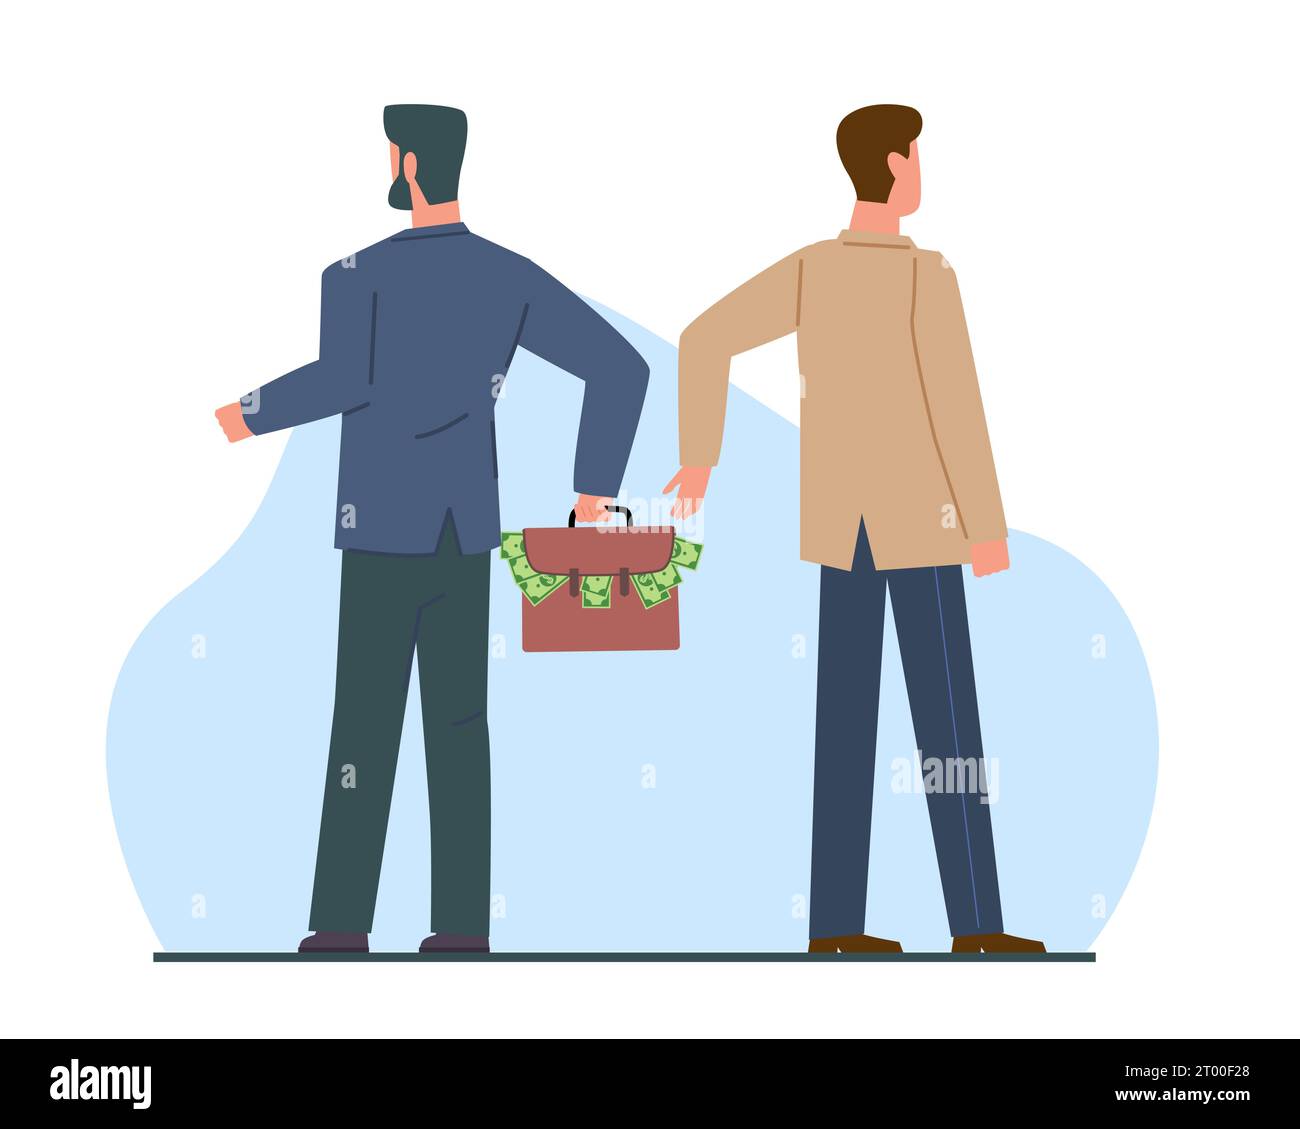 Concept of corruption, man hands another man suitcase full of money. Financial crime, giving bribe in cash, bribery in business. Bribery in business Stock Vector